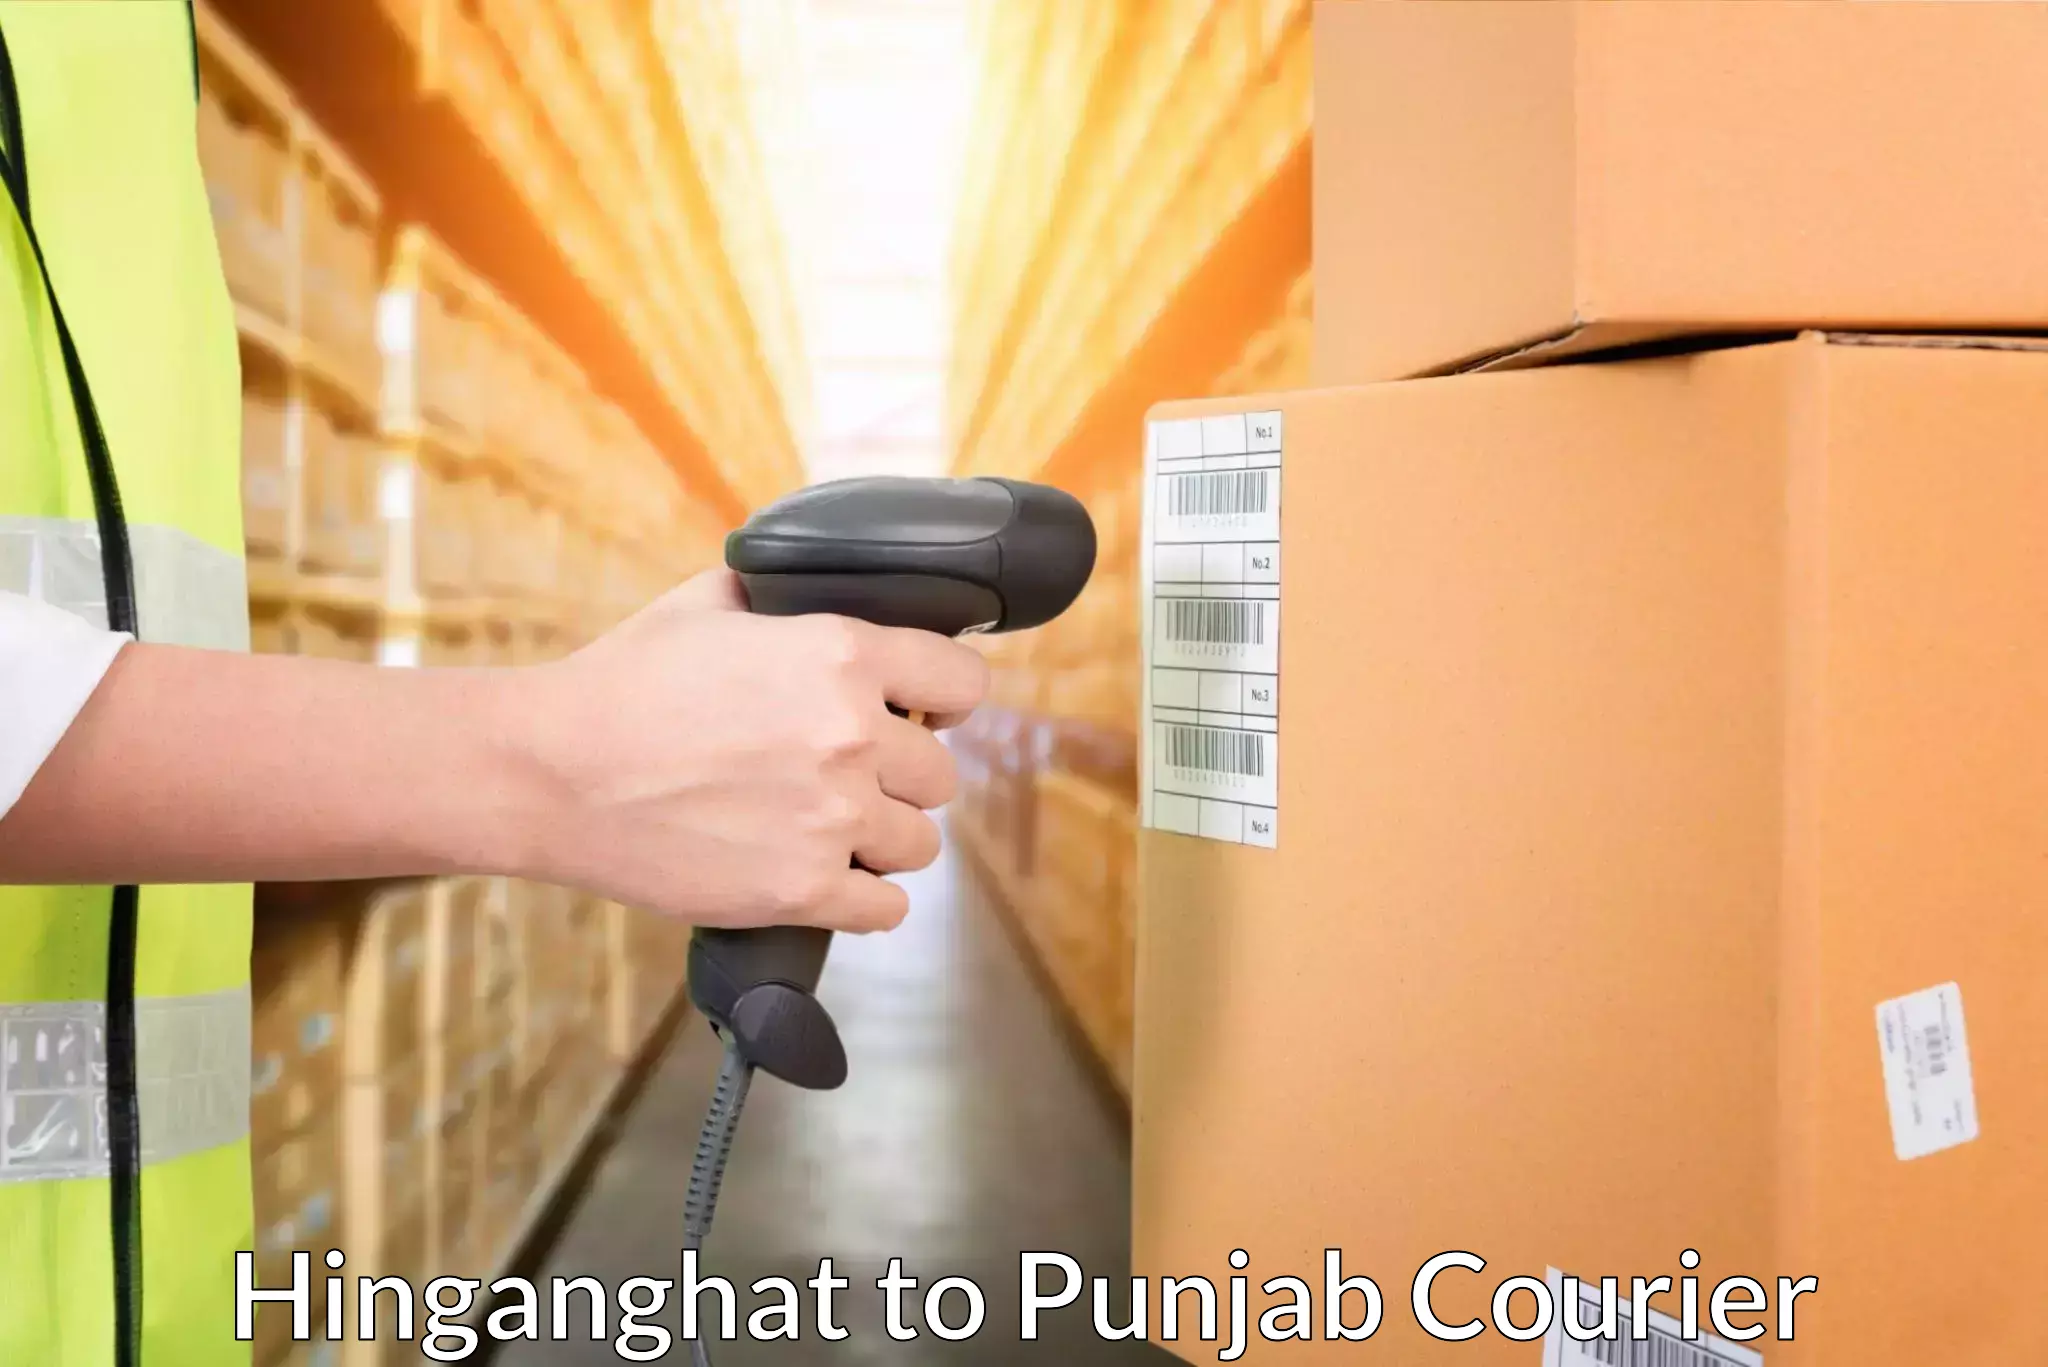 Courier service innovation Hinganghat to Mohali